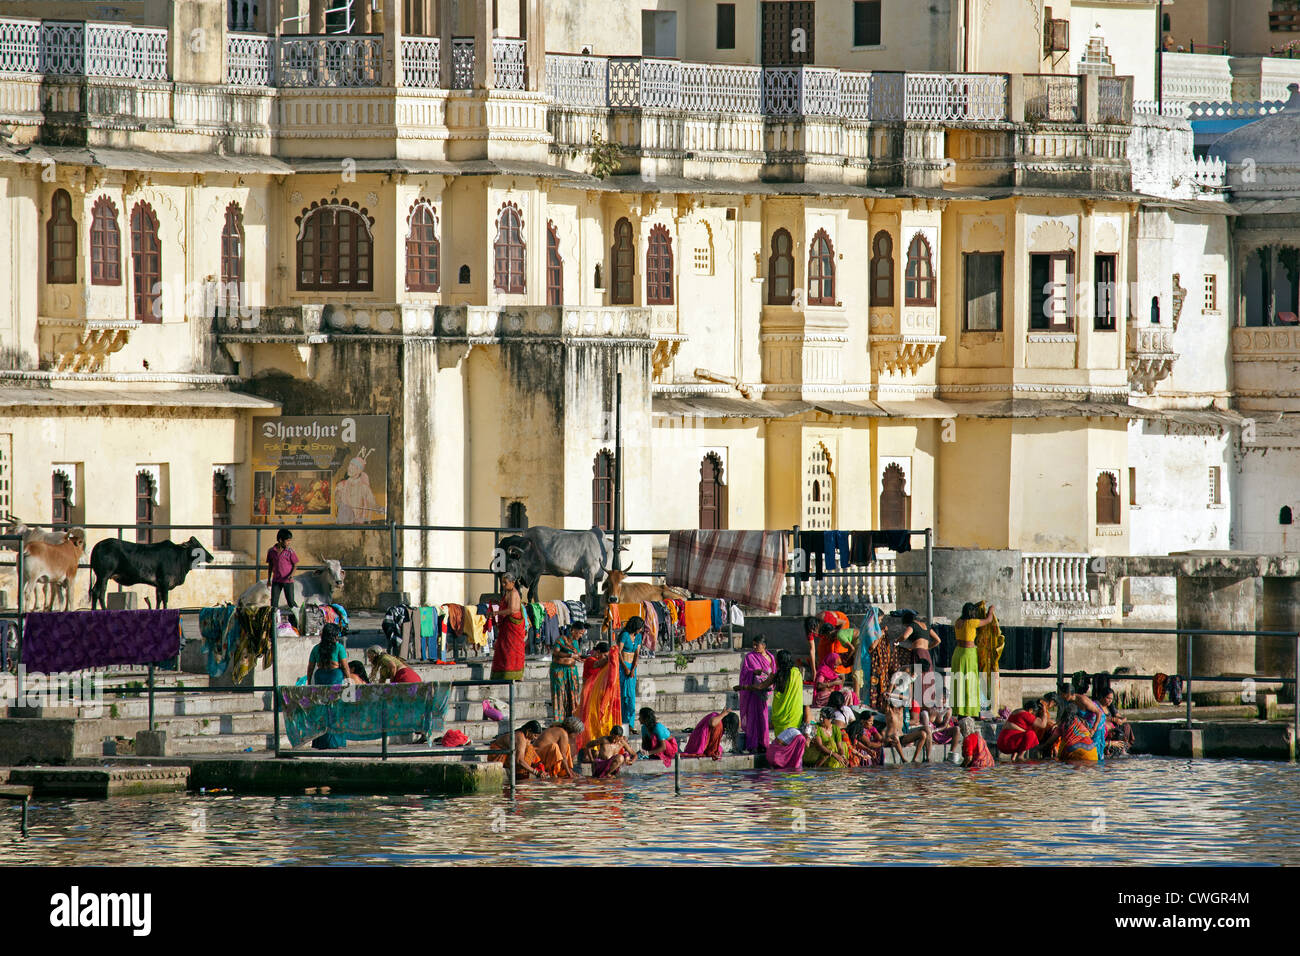 Women bathing in the Ahar River in the city of Udaipur / City of Lakes, Rajasthan, India Stock Photo